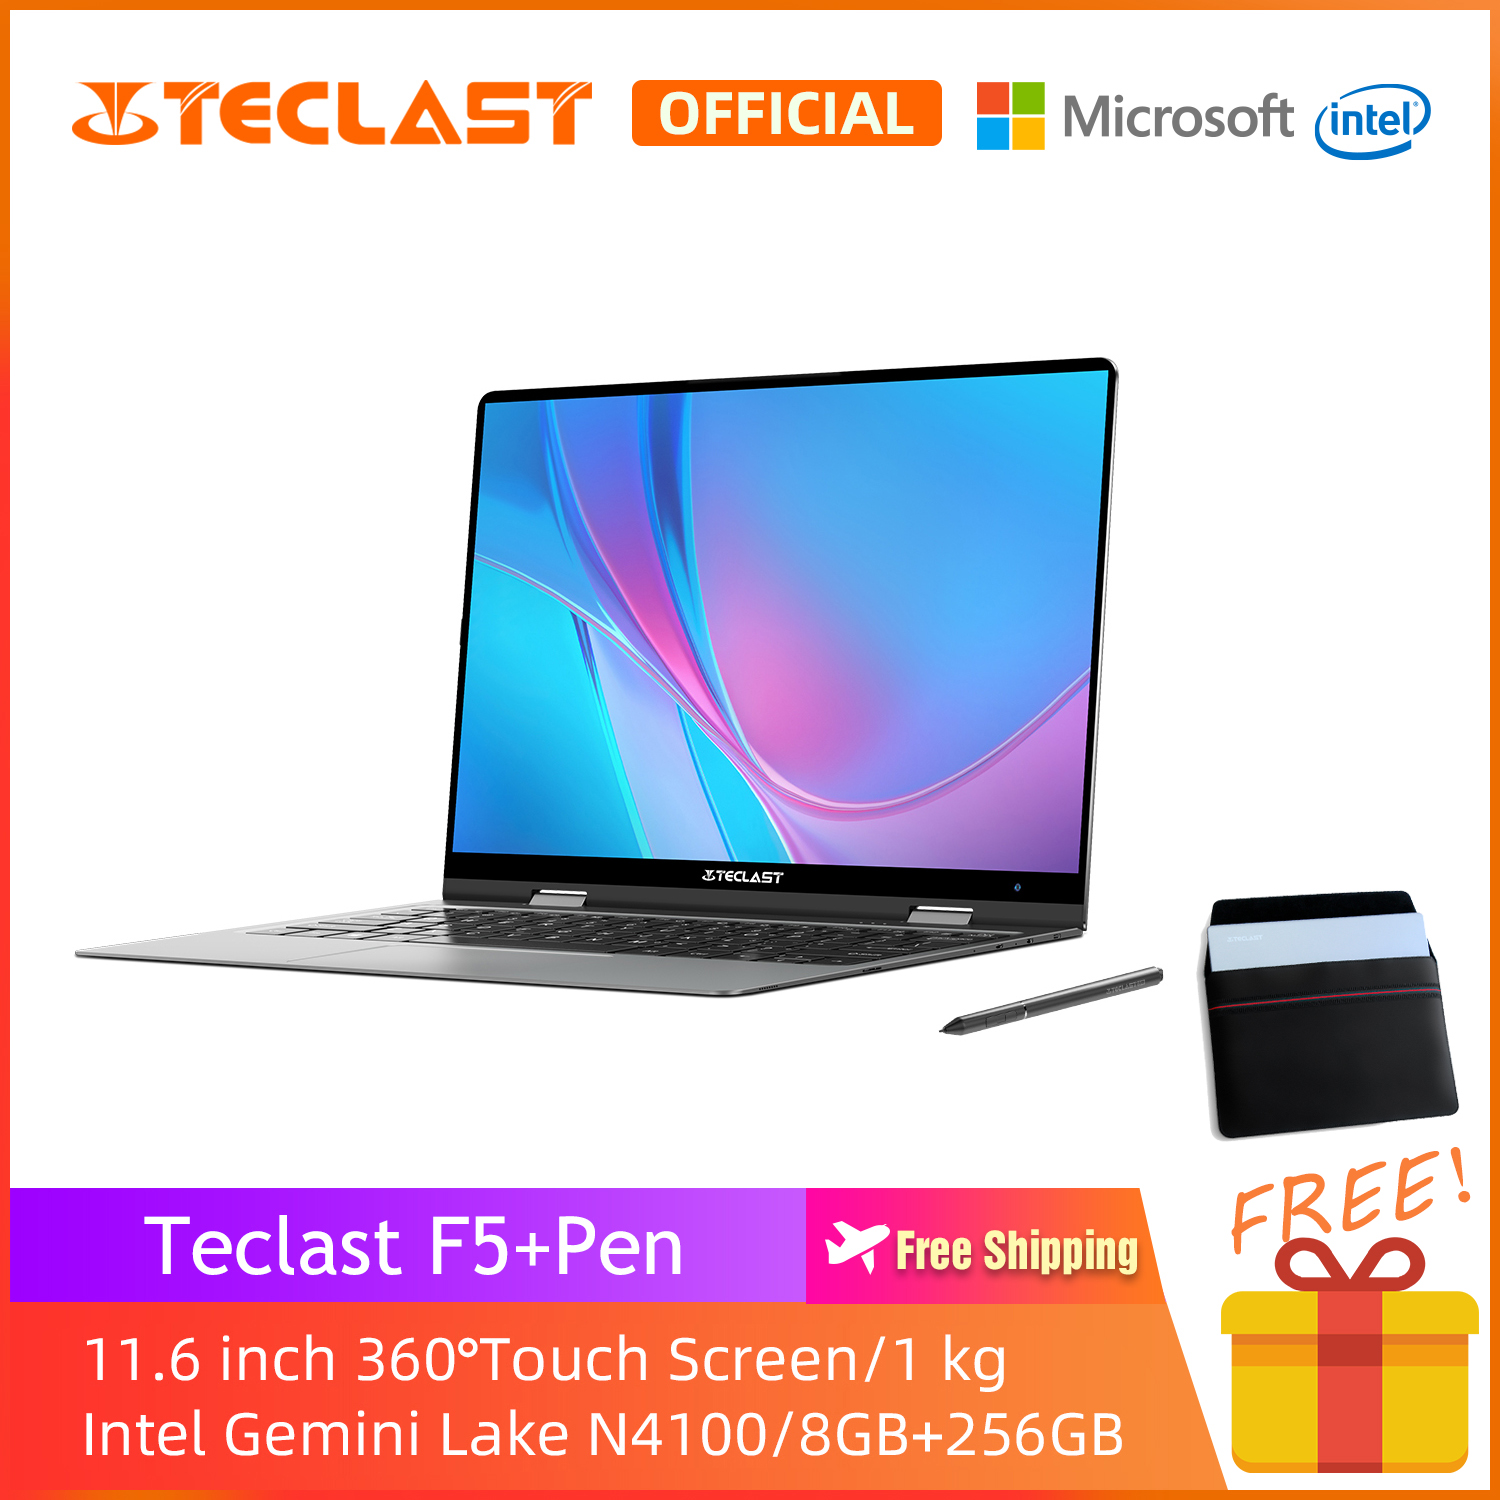 【Teclast Official】 F5 Traditional Laptop/11.6 inch  360° Rotating Touch Screen/Intel Gemini Lake N4100 CPU/1920X1080 Resolution/8GB+256GB SSD/1 kg Ultra-light/Dual Band WIFI